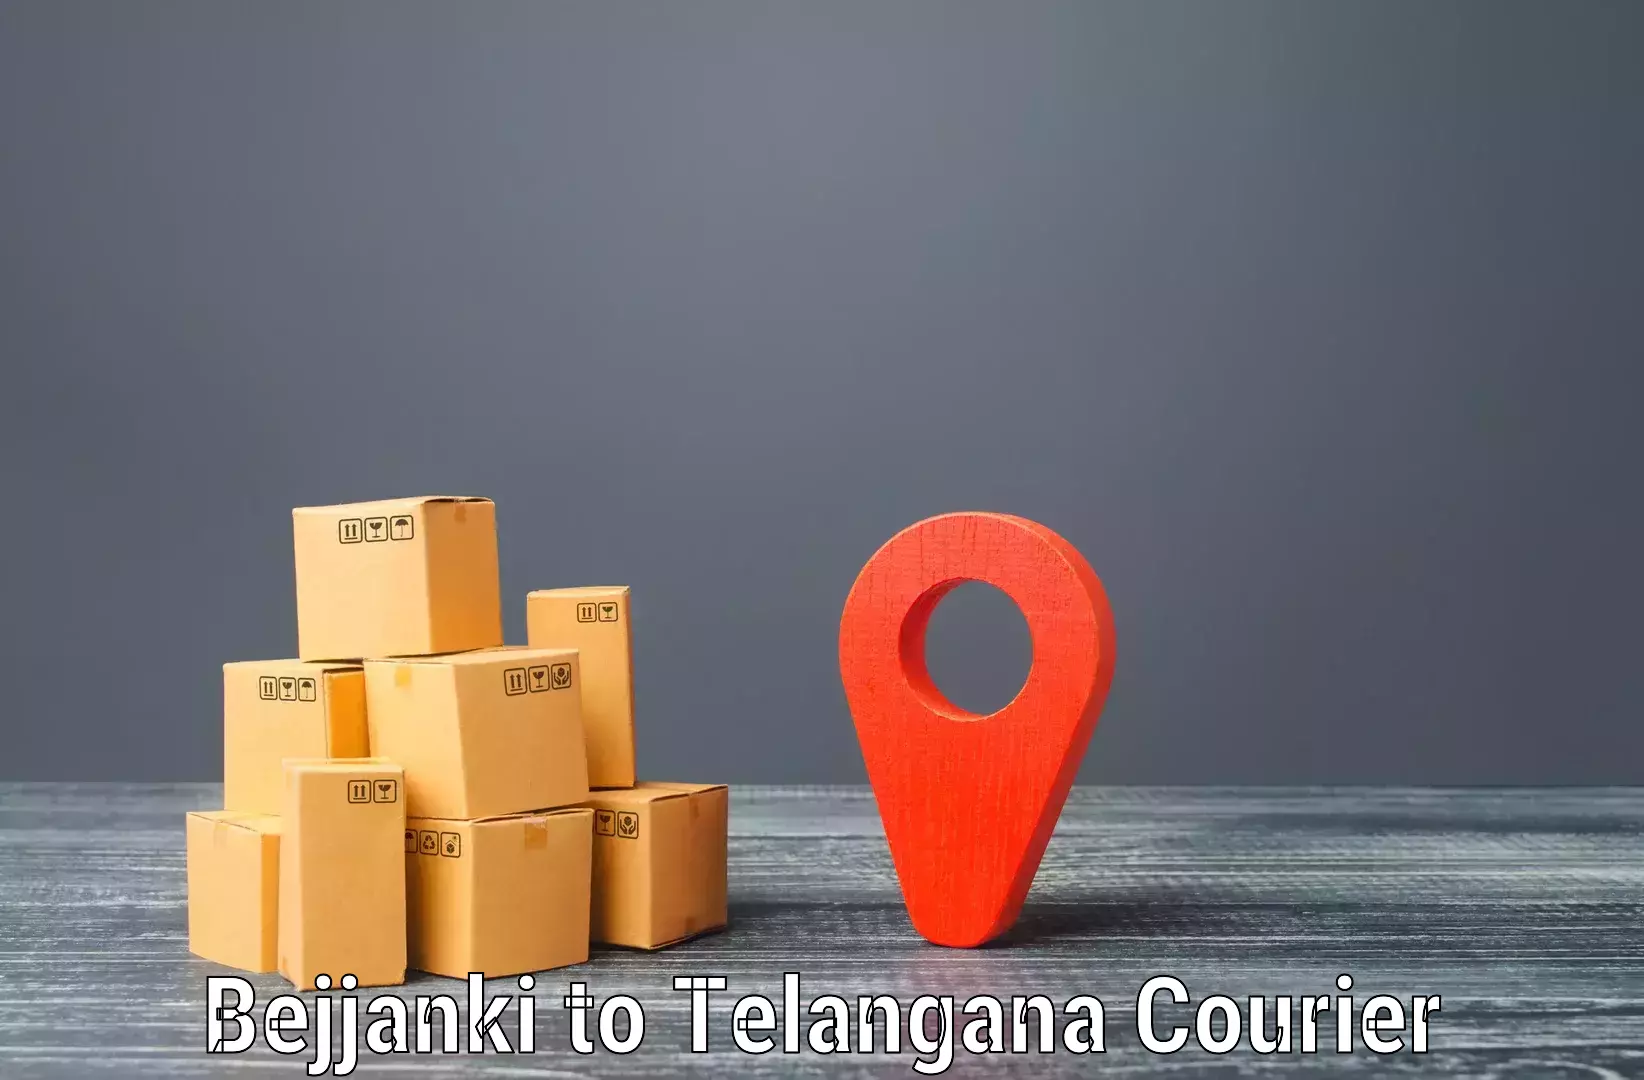 Flexible delivery scheduling in Bejjanki to Sultanabad